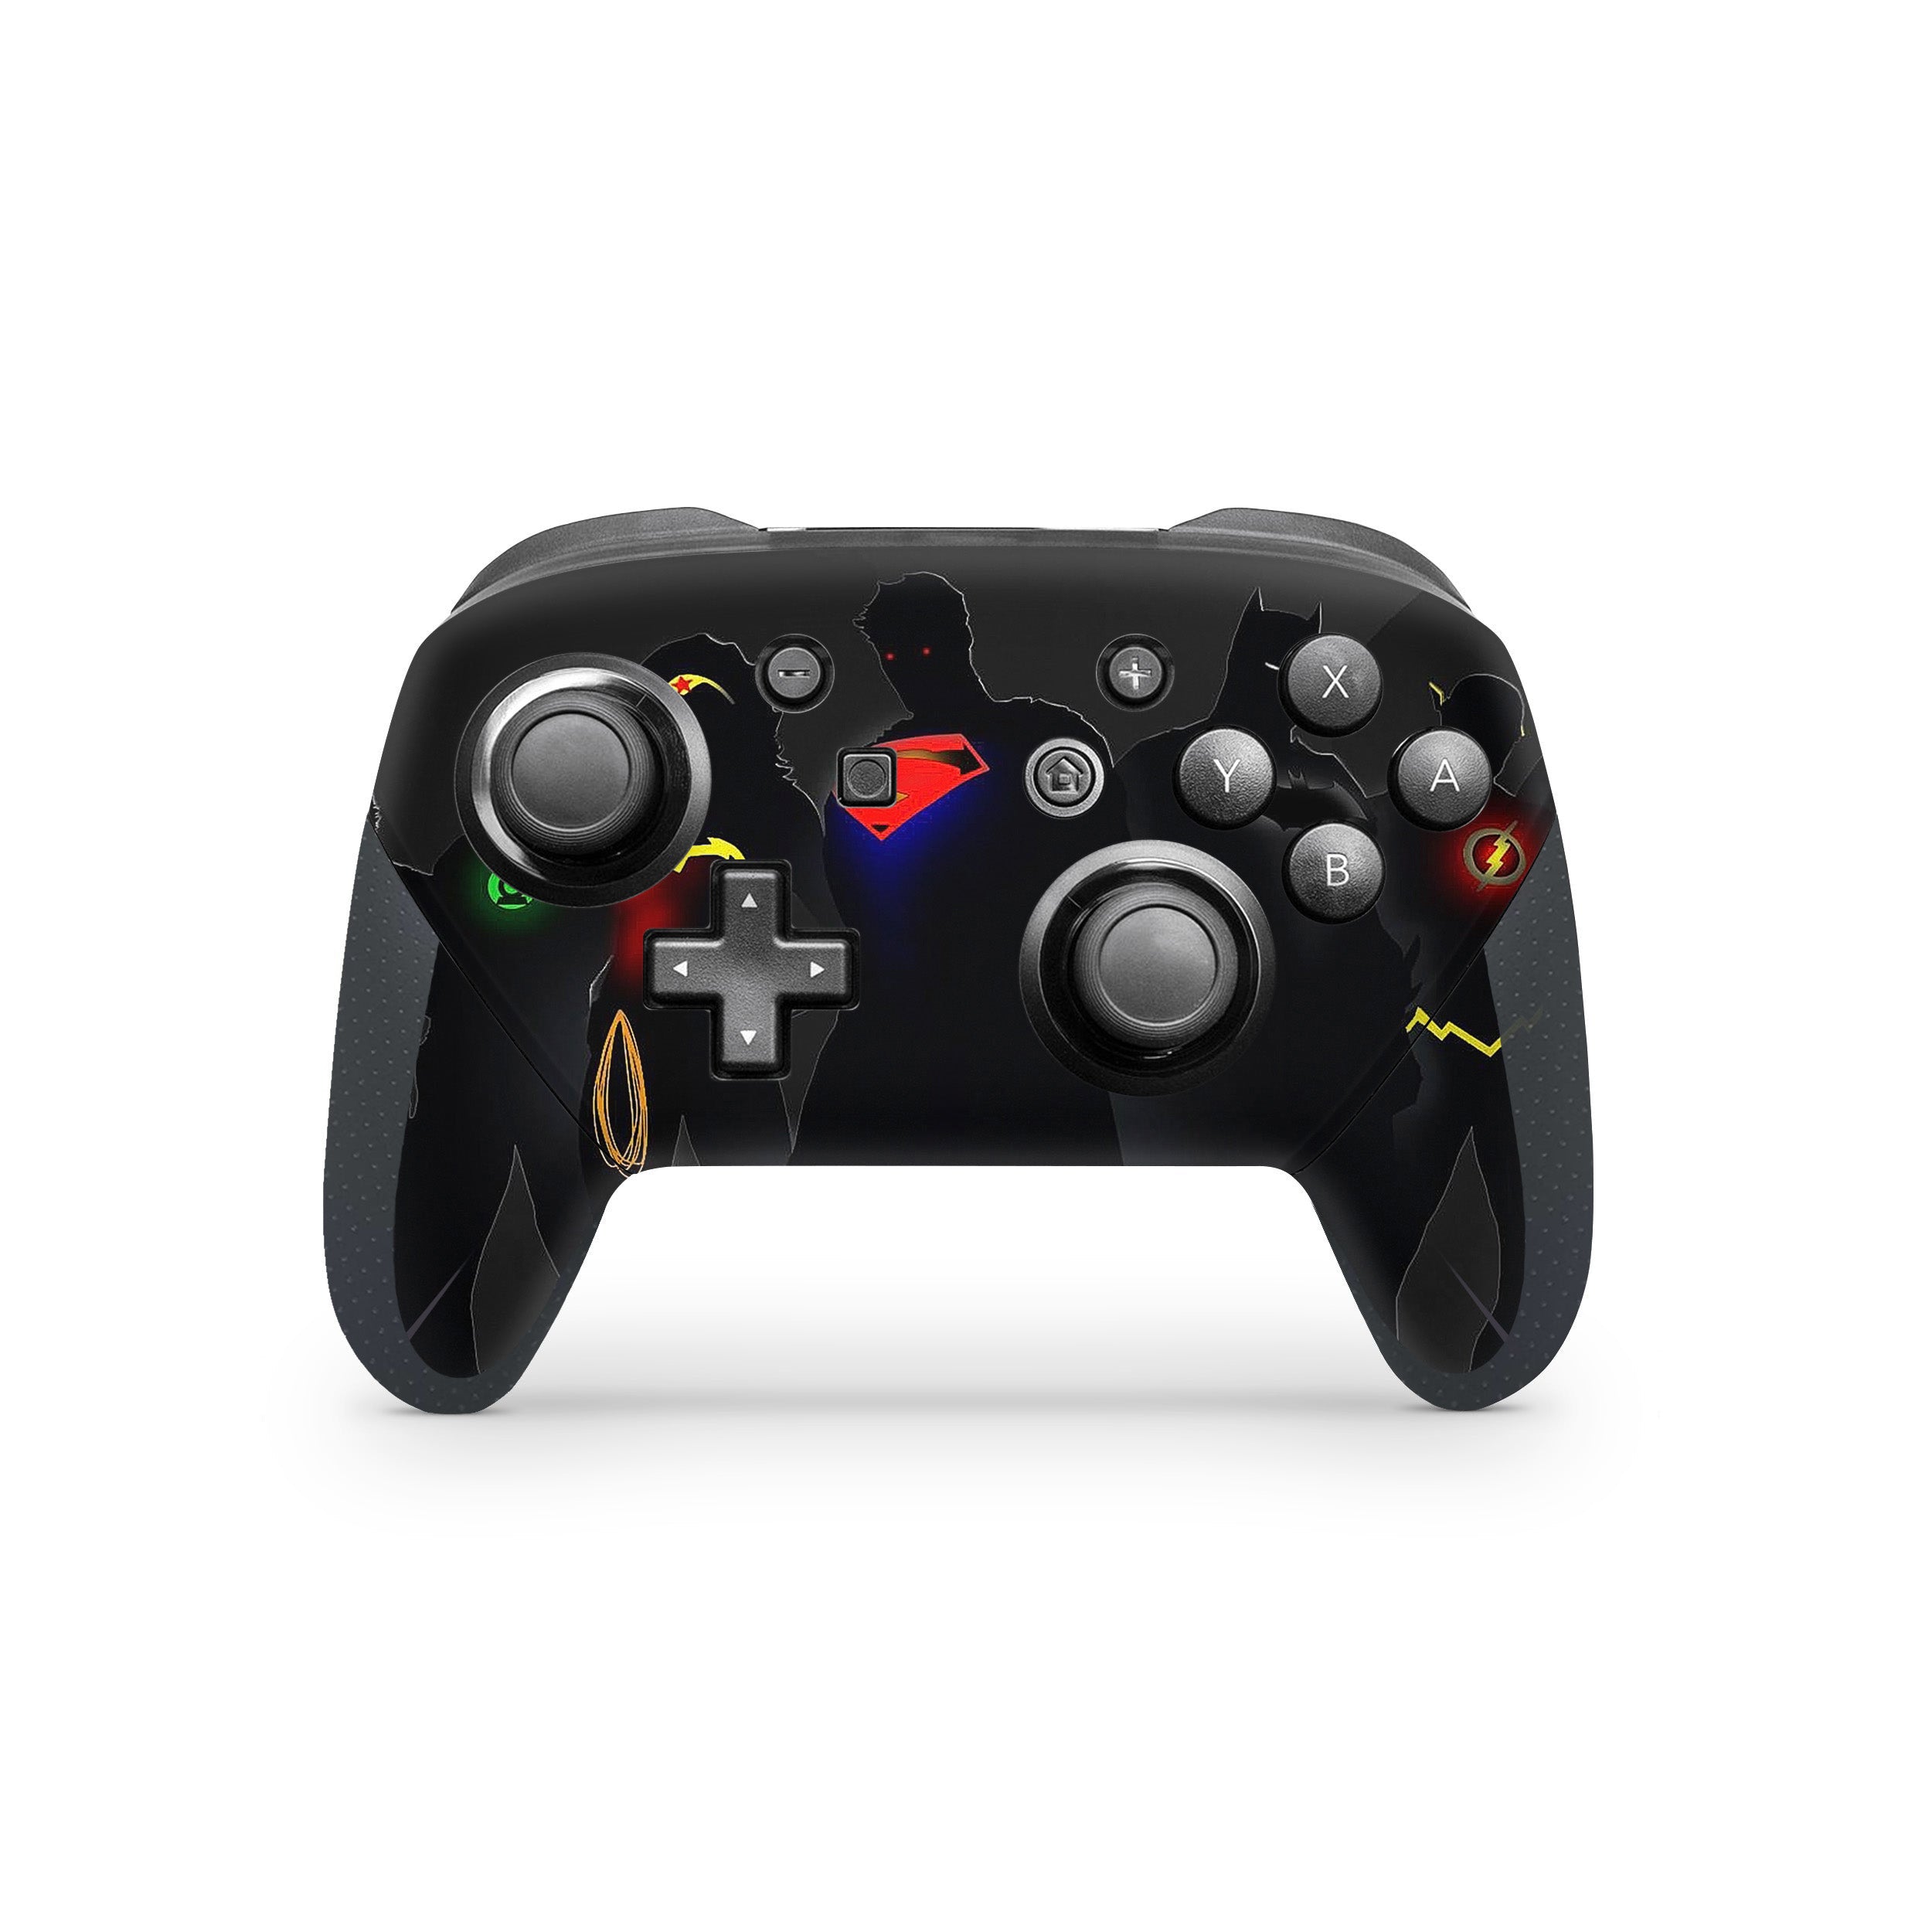 A video game skin featuring a DC Justice League design for the Switch Pro Controller.